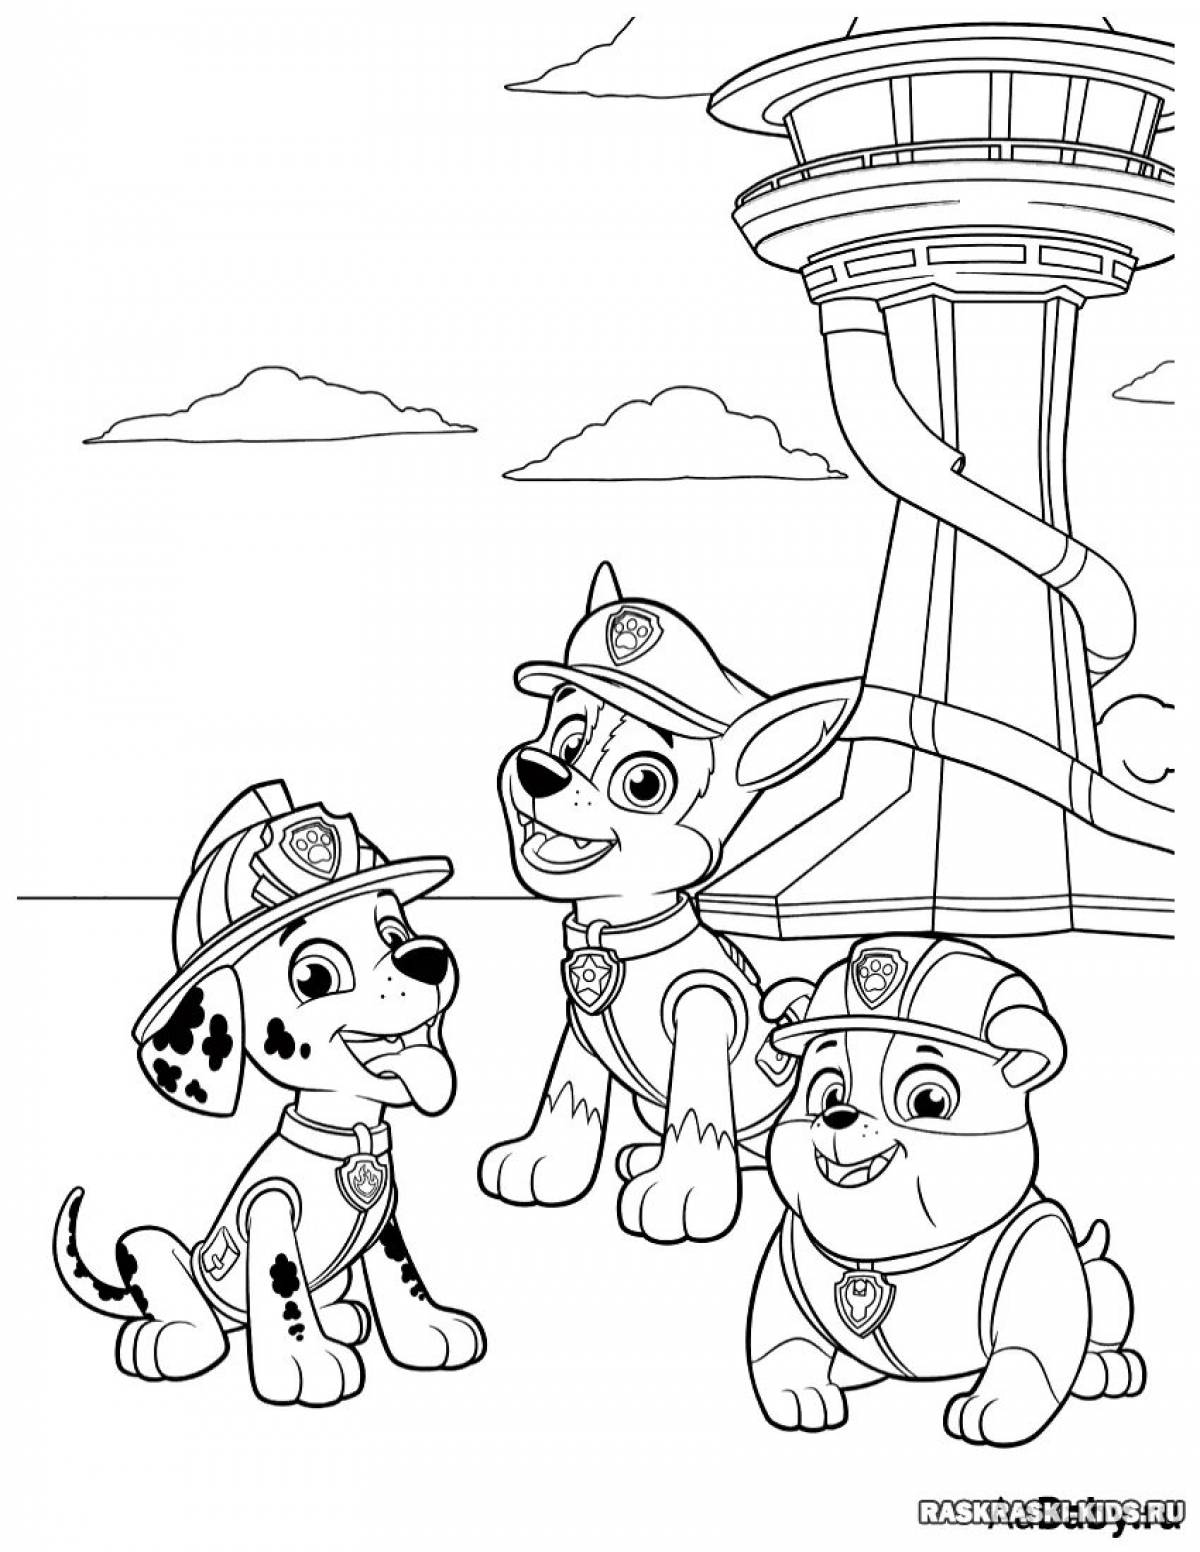 Radiant paw patrol tower coloring page